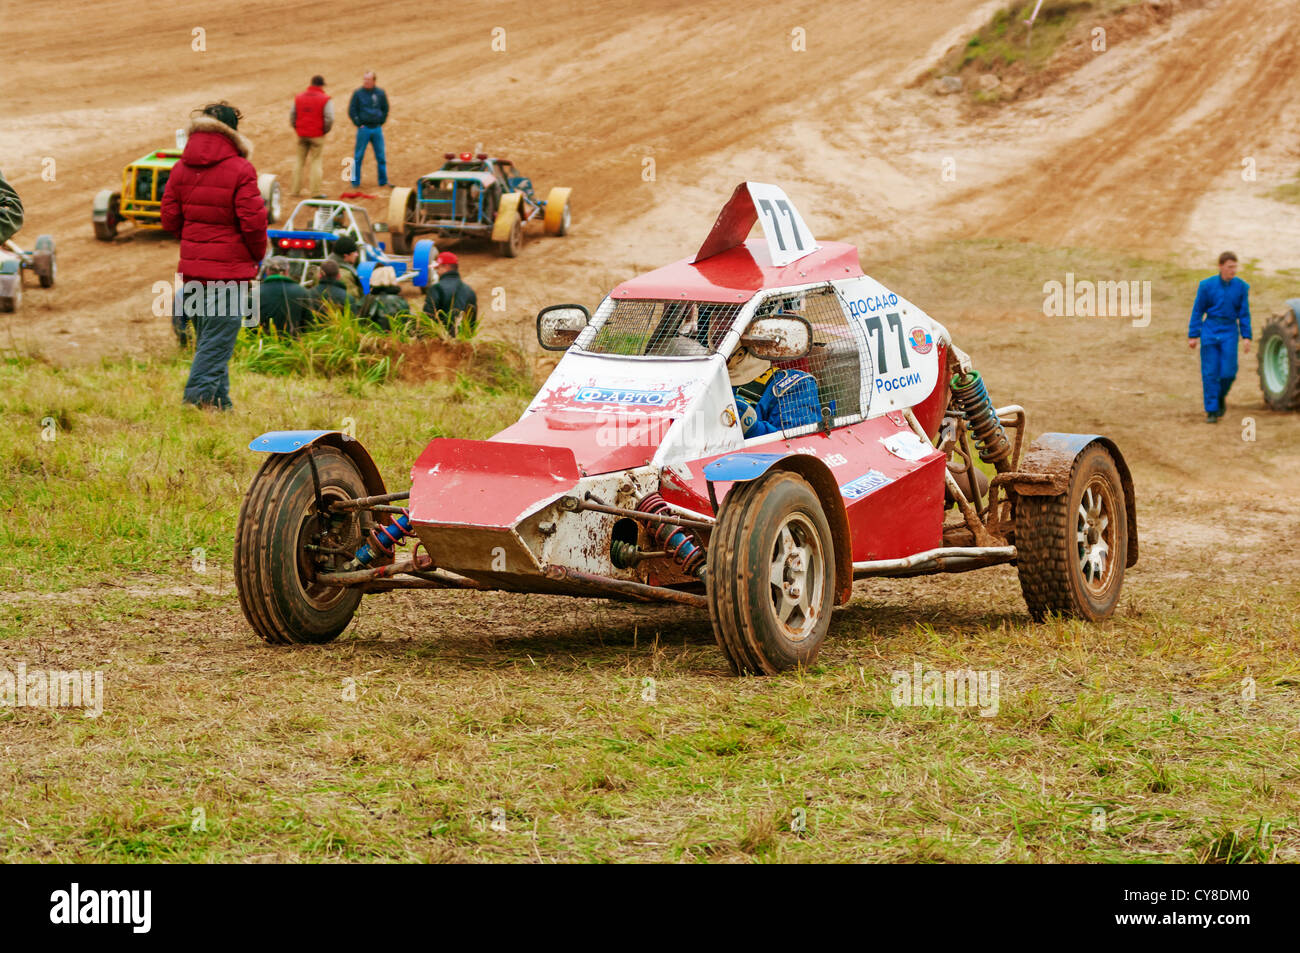 The buggy-cart comes back after test race. Stock Photo